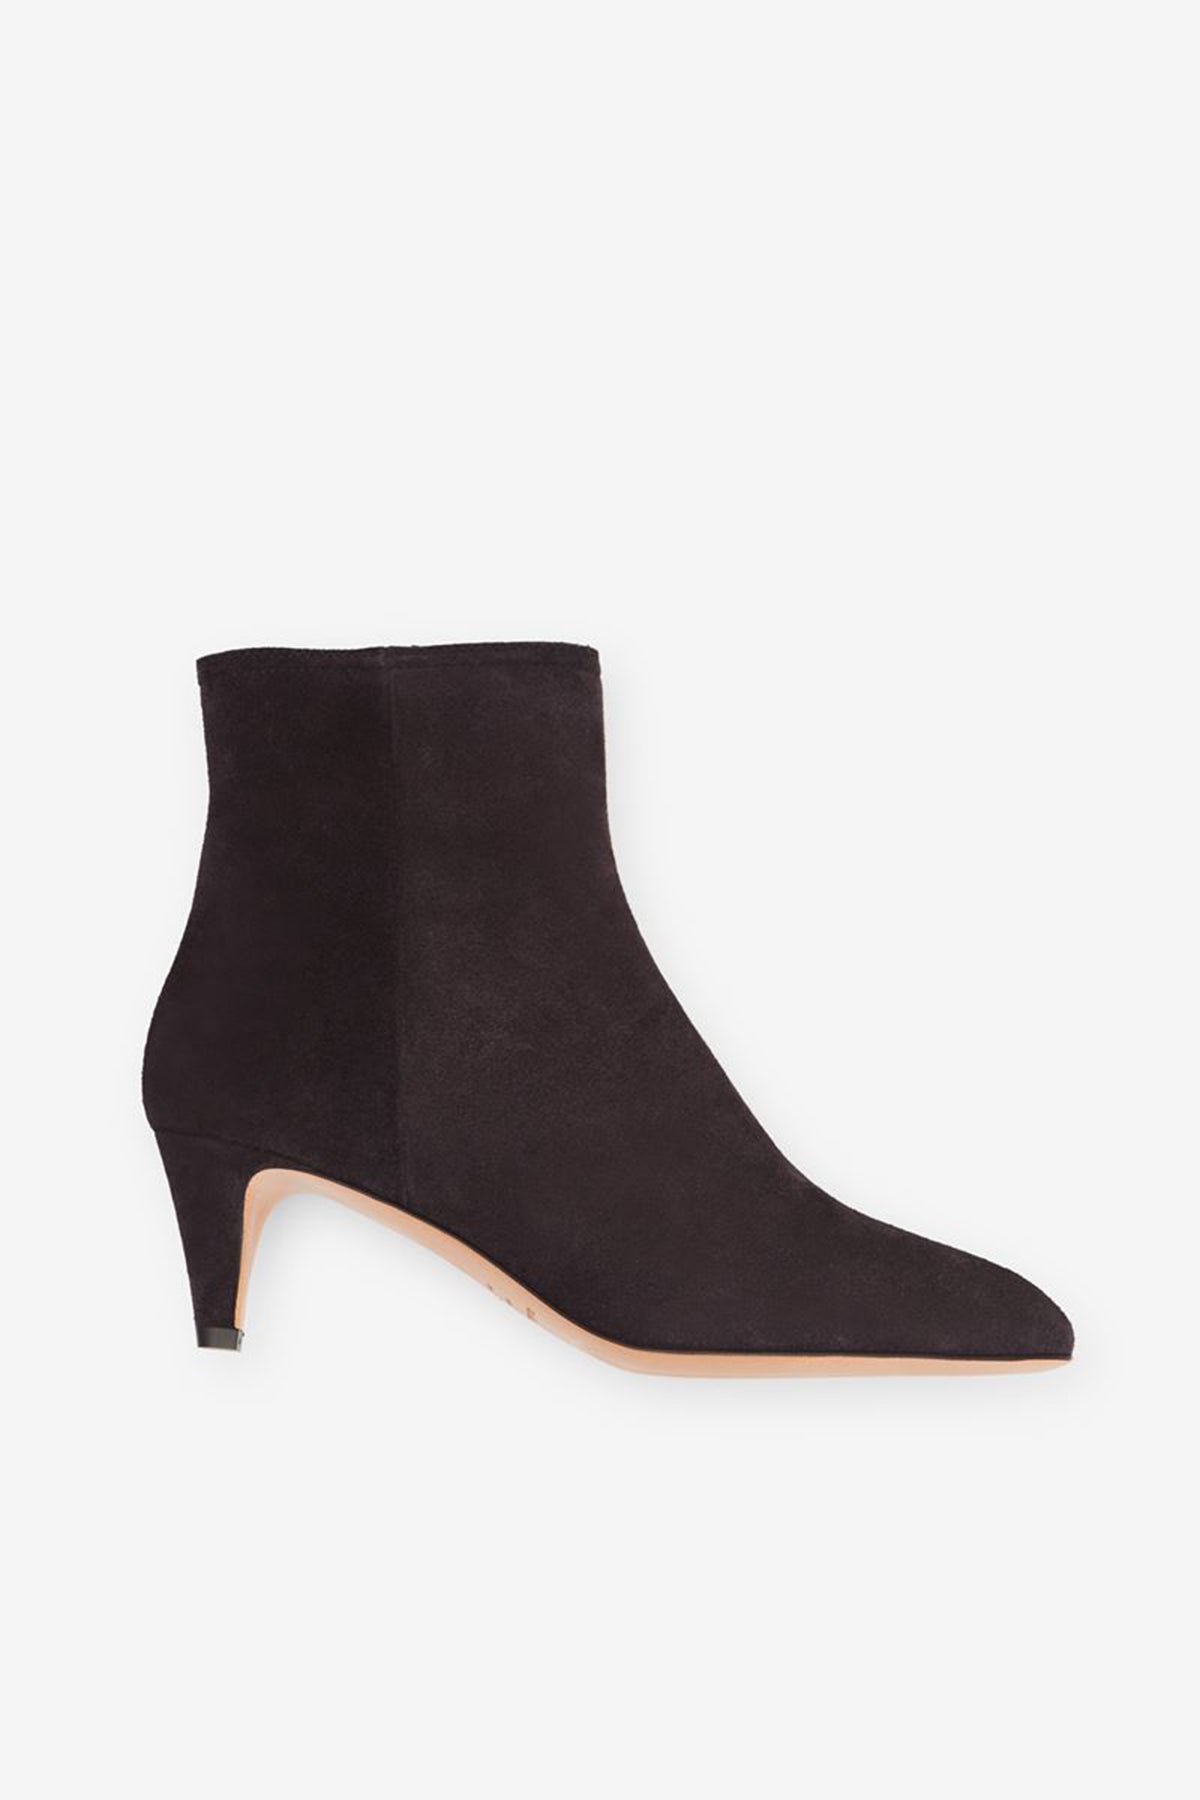 Isabel Marant Deone Suede Ankle Boots